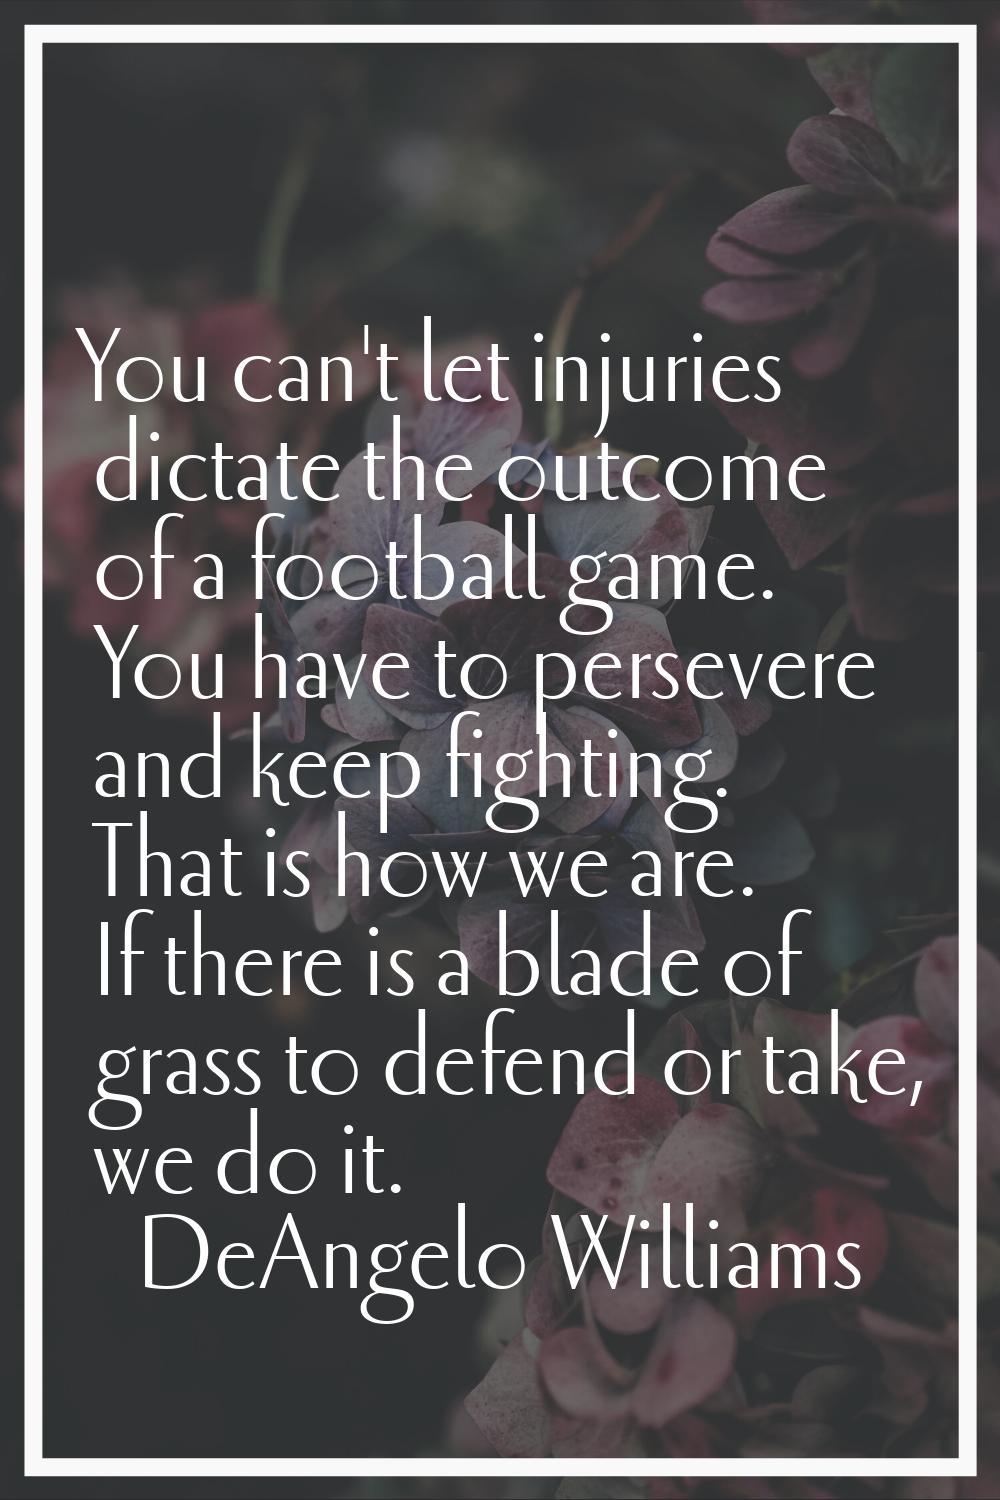 You can't let injuries dictate the outcome of a football game. You have to persevere and keep fight